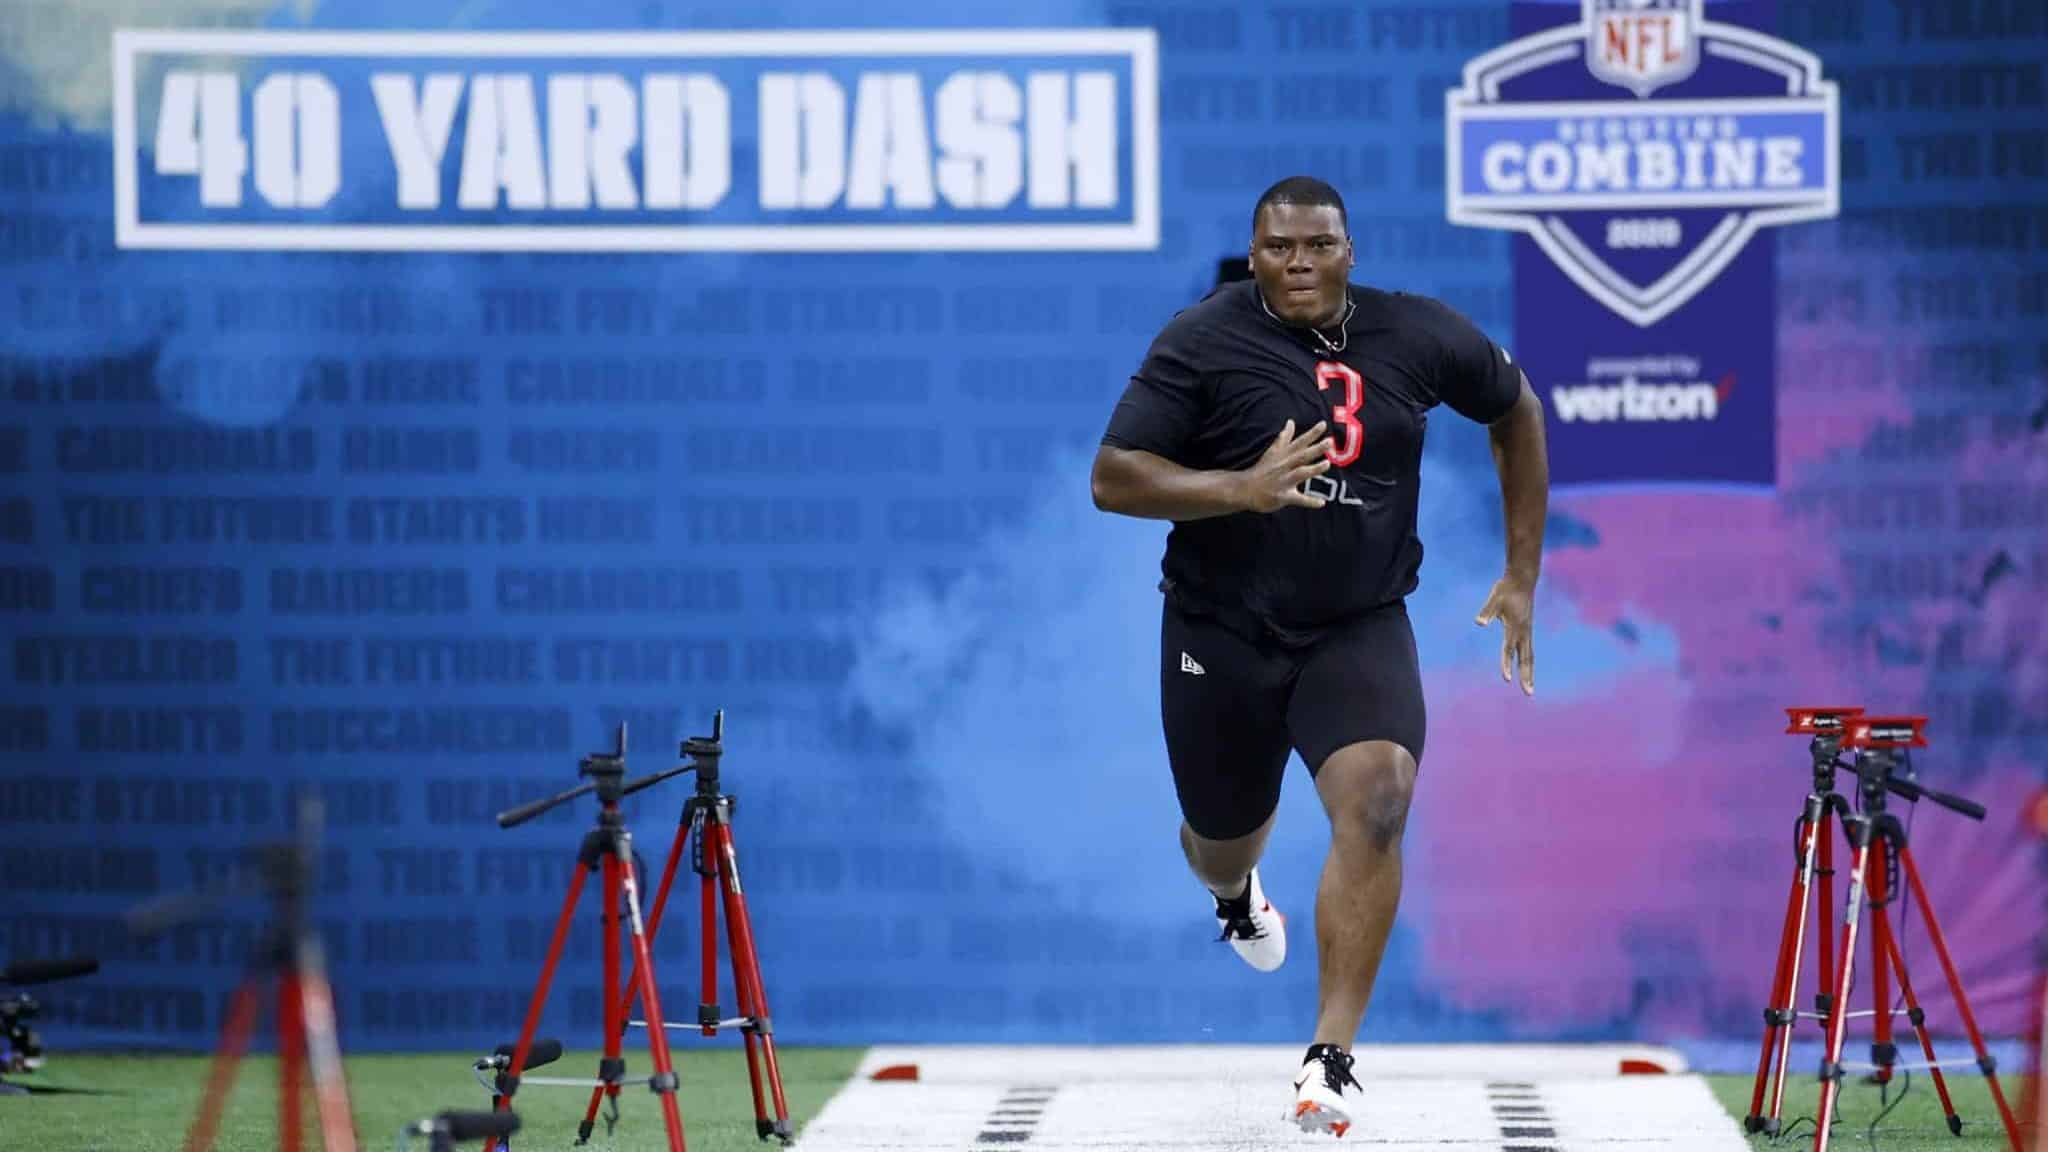 INDIANAPOLIS, IN - FEBRUARY 29: Defensive lineman Derrick Brown of Auburn runs the 40-yard dash during the NFL Combine at Lucas Oil Stadium on February 29, 2020 in Indianapolis, Indiana.